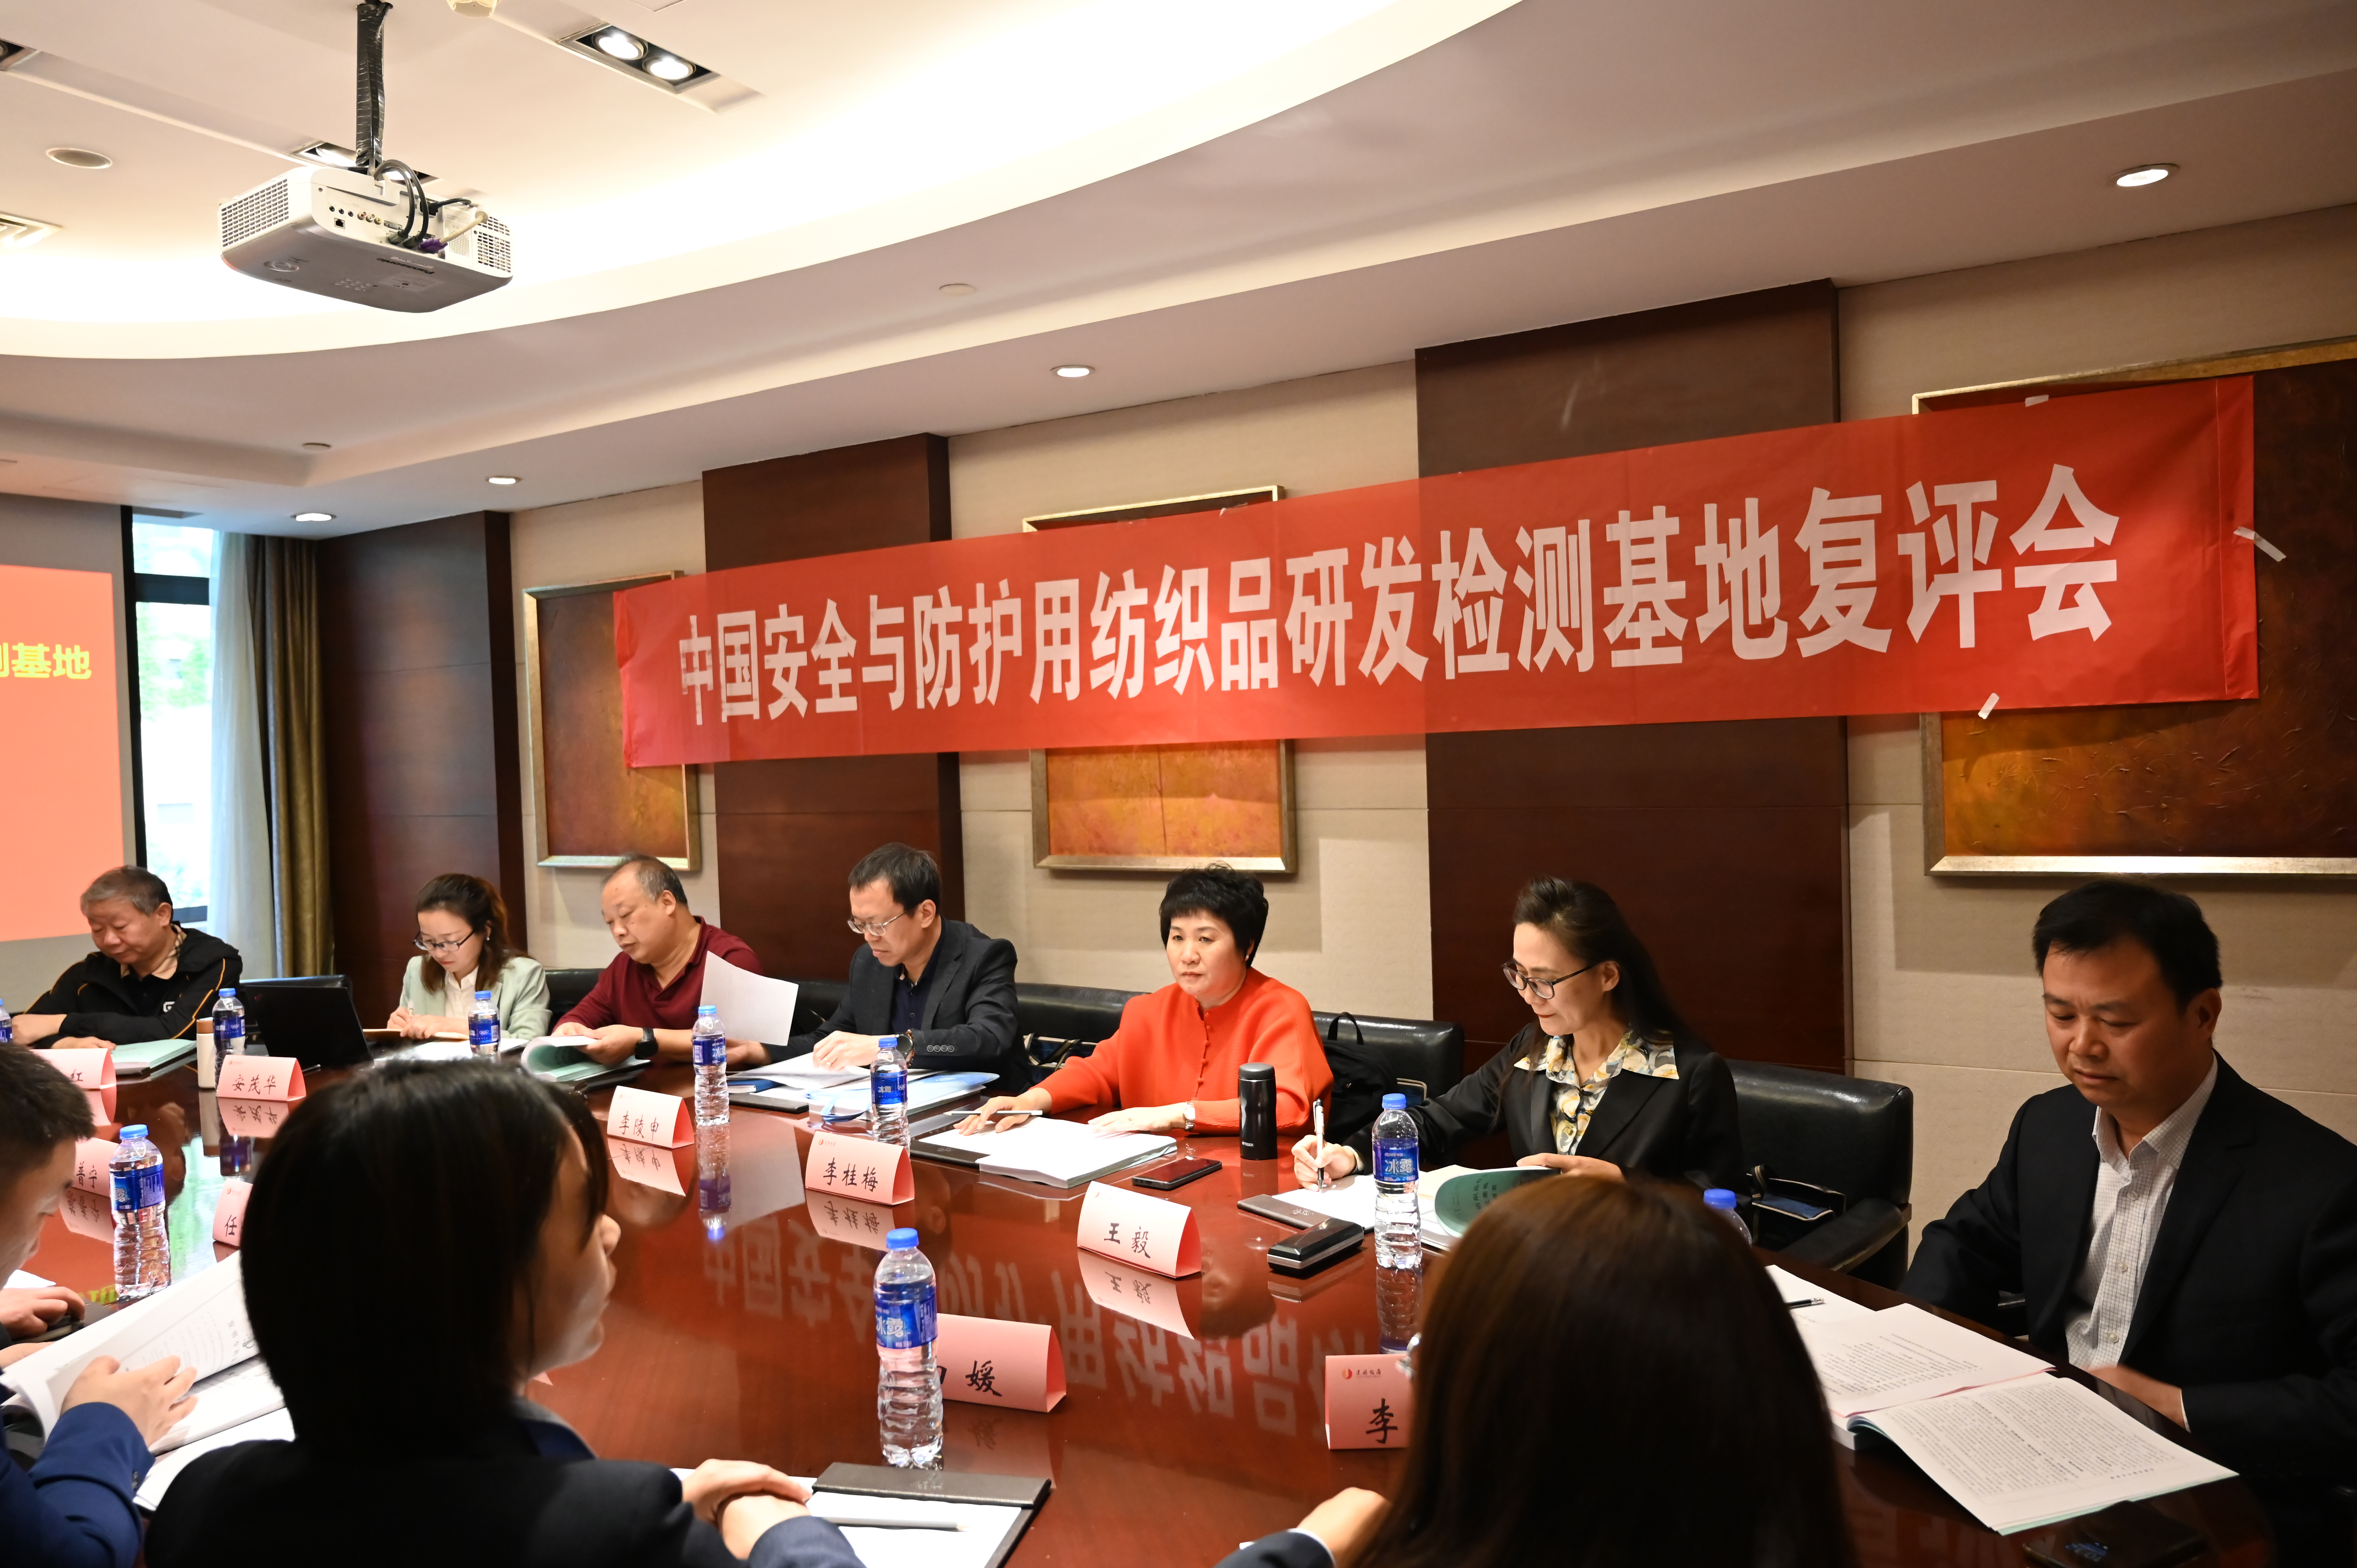 The re-evaluation meeting of China's safety and protective textile R&D and testing base was successfully held